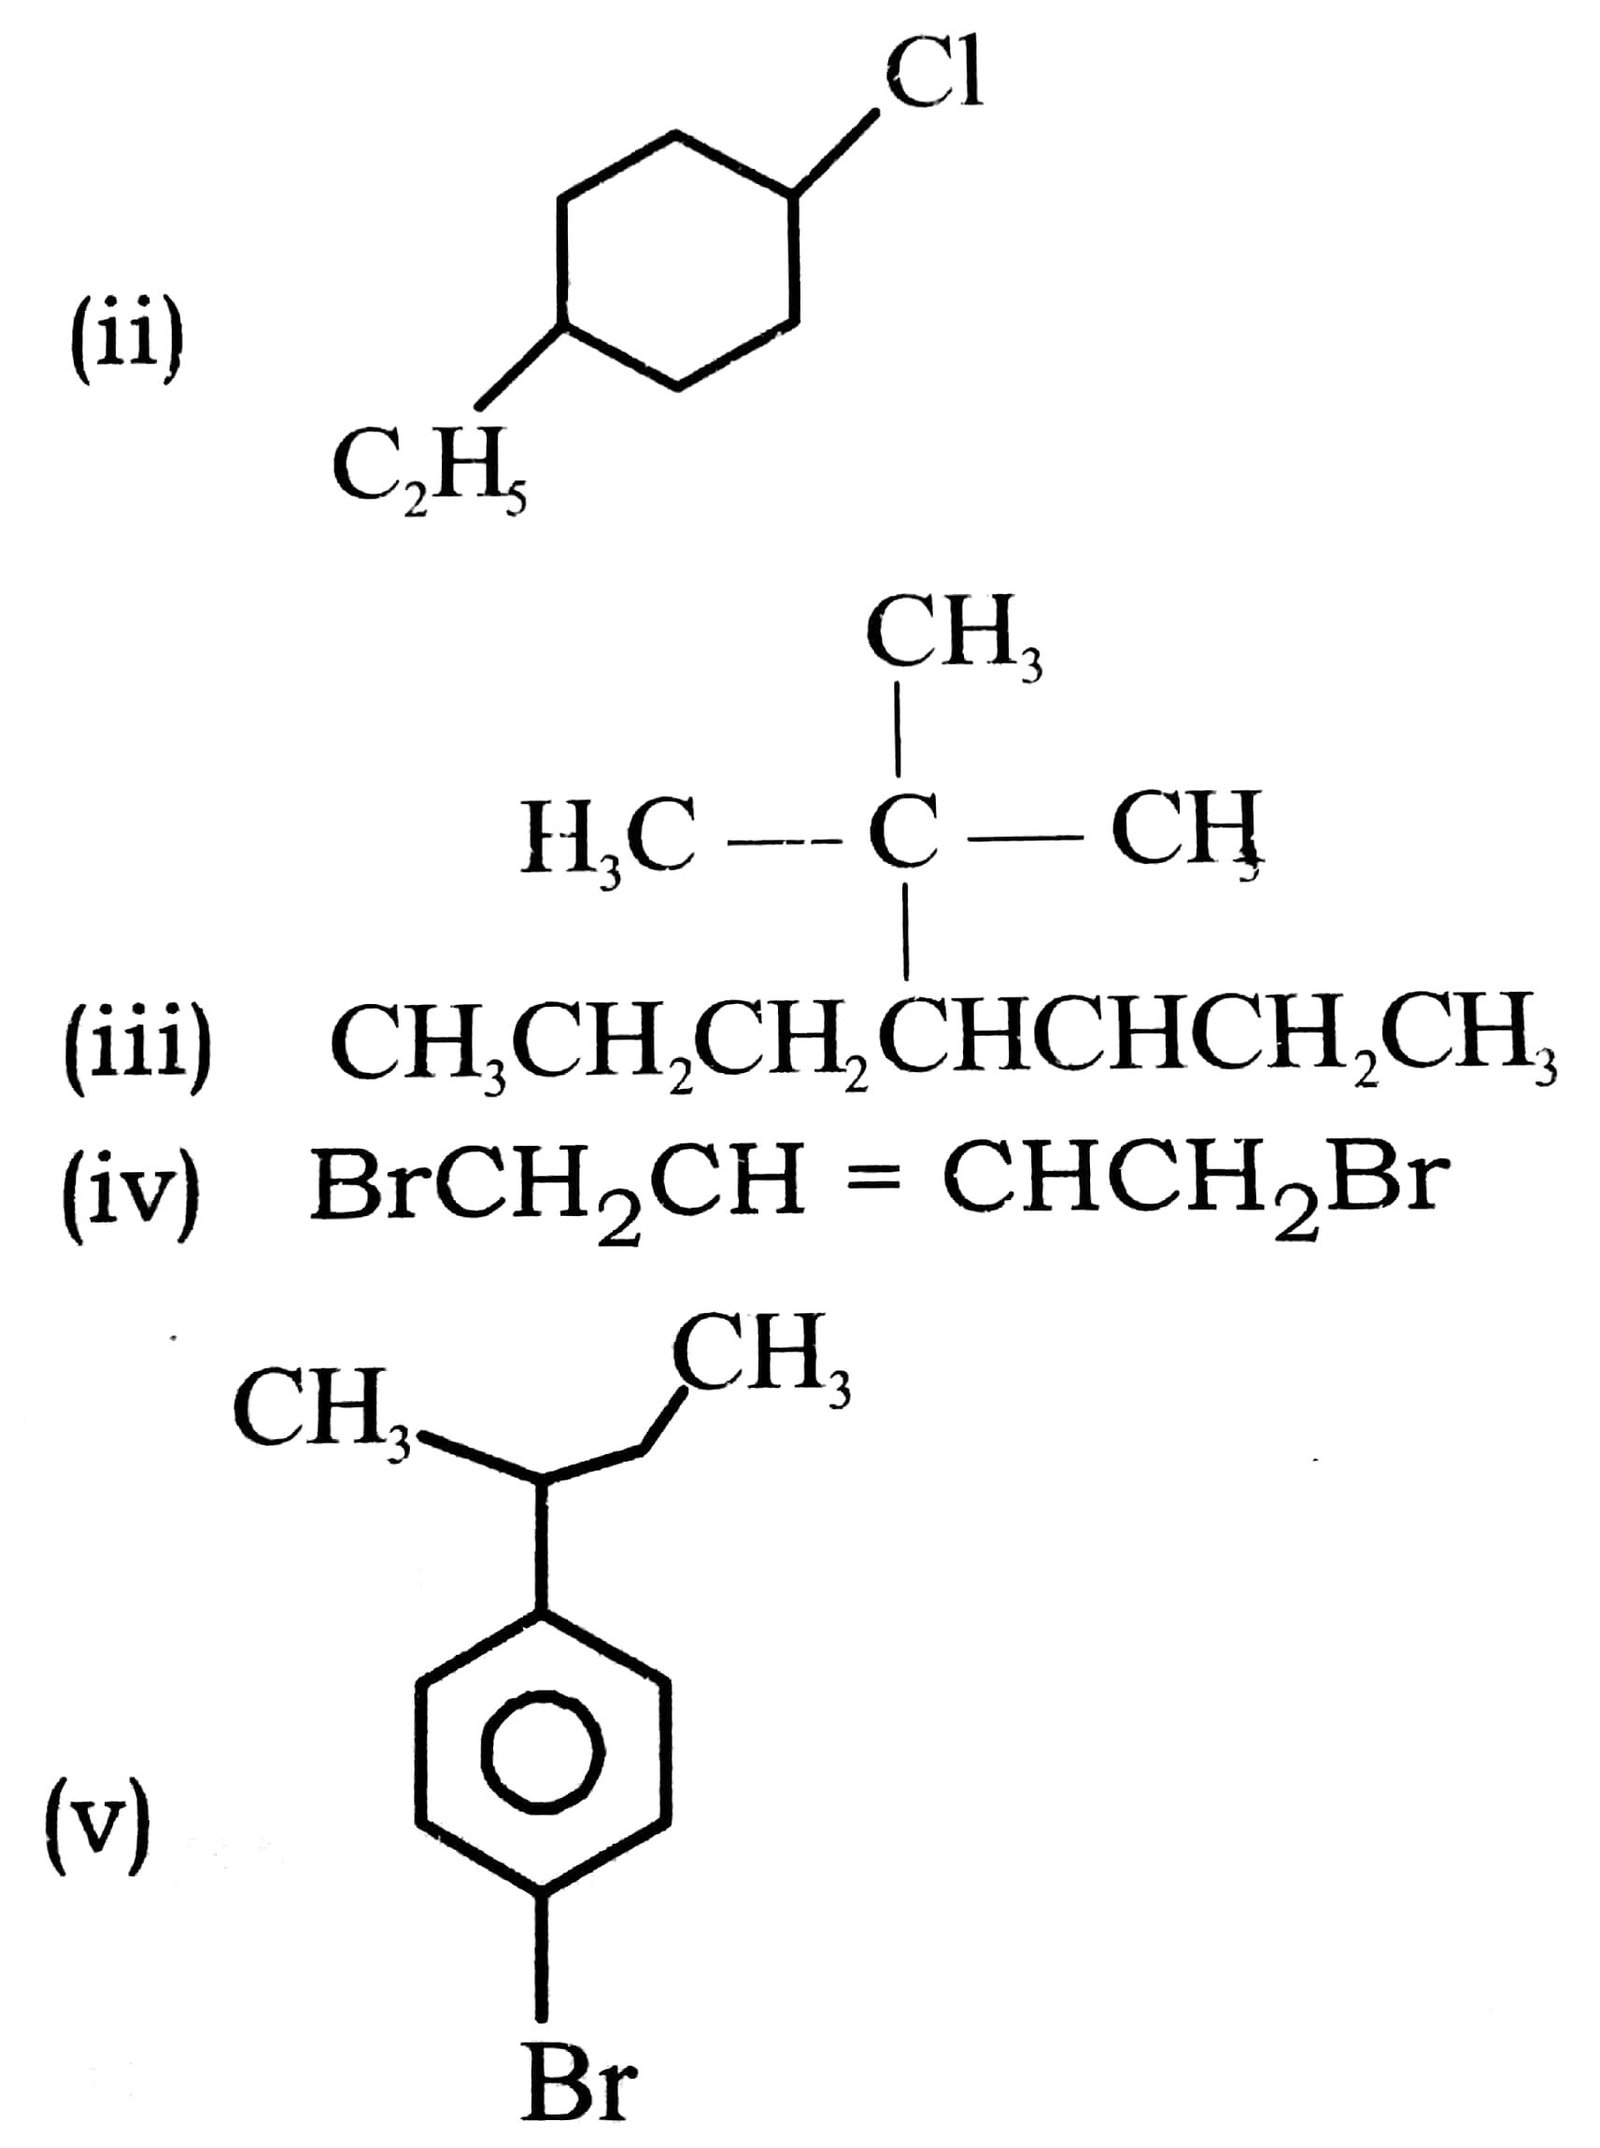 Write structures of the following